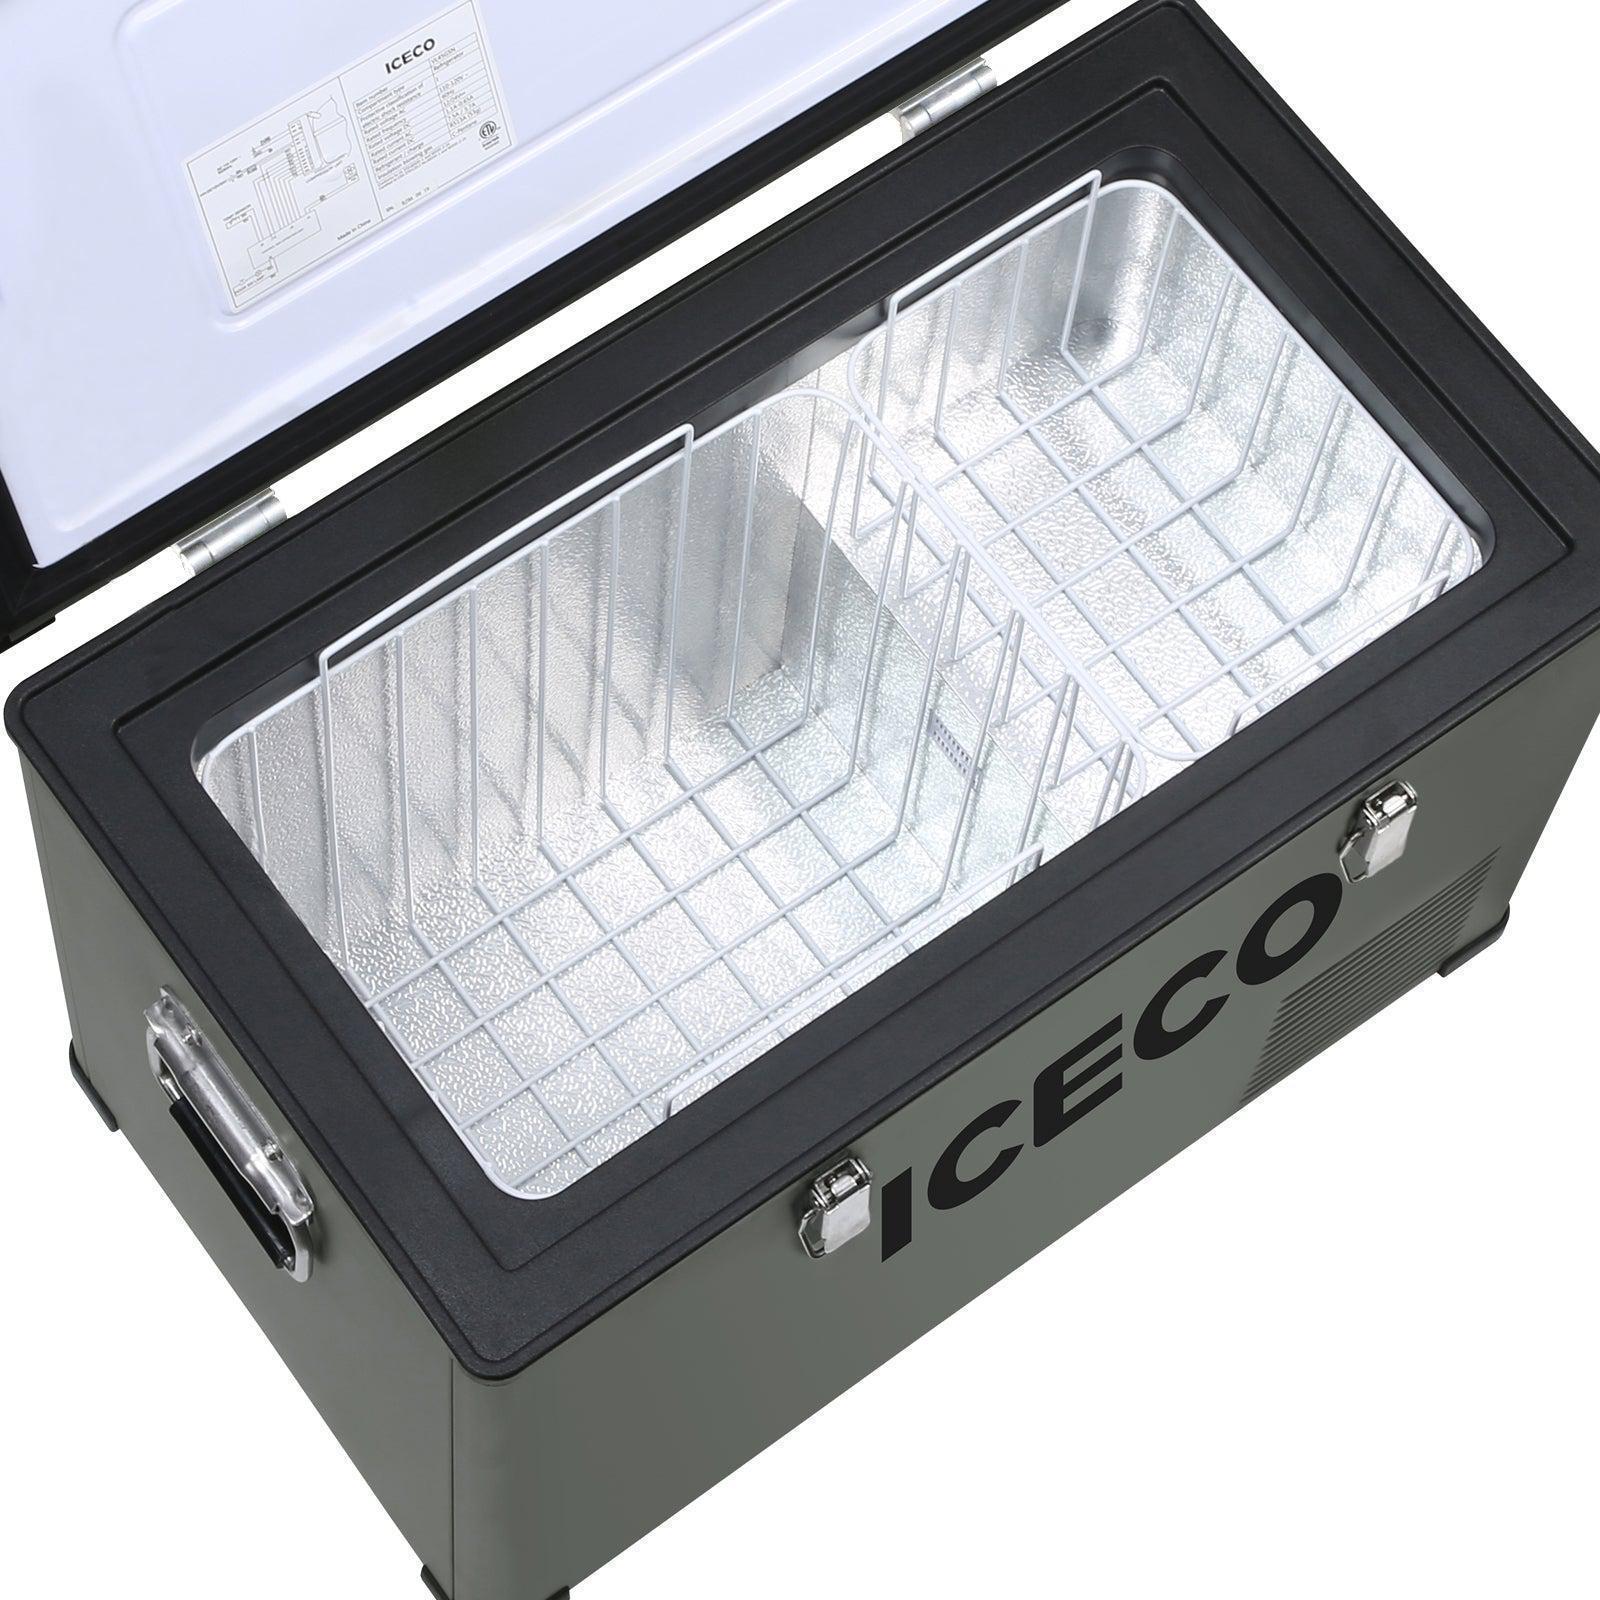 ICECO VL45 Pros Portable Refrigerator, Multi-Directional Lid, Dual USB & DC 12/24v, AC 110-240V, 45L Steel Compact Refrigerator Powered by SECOP, 0°F